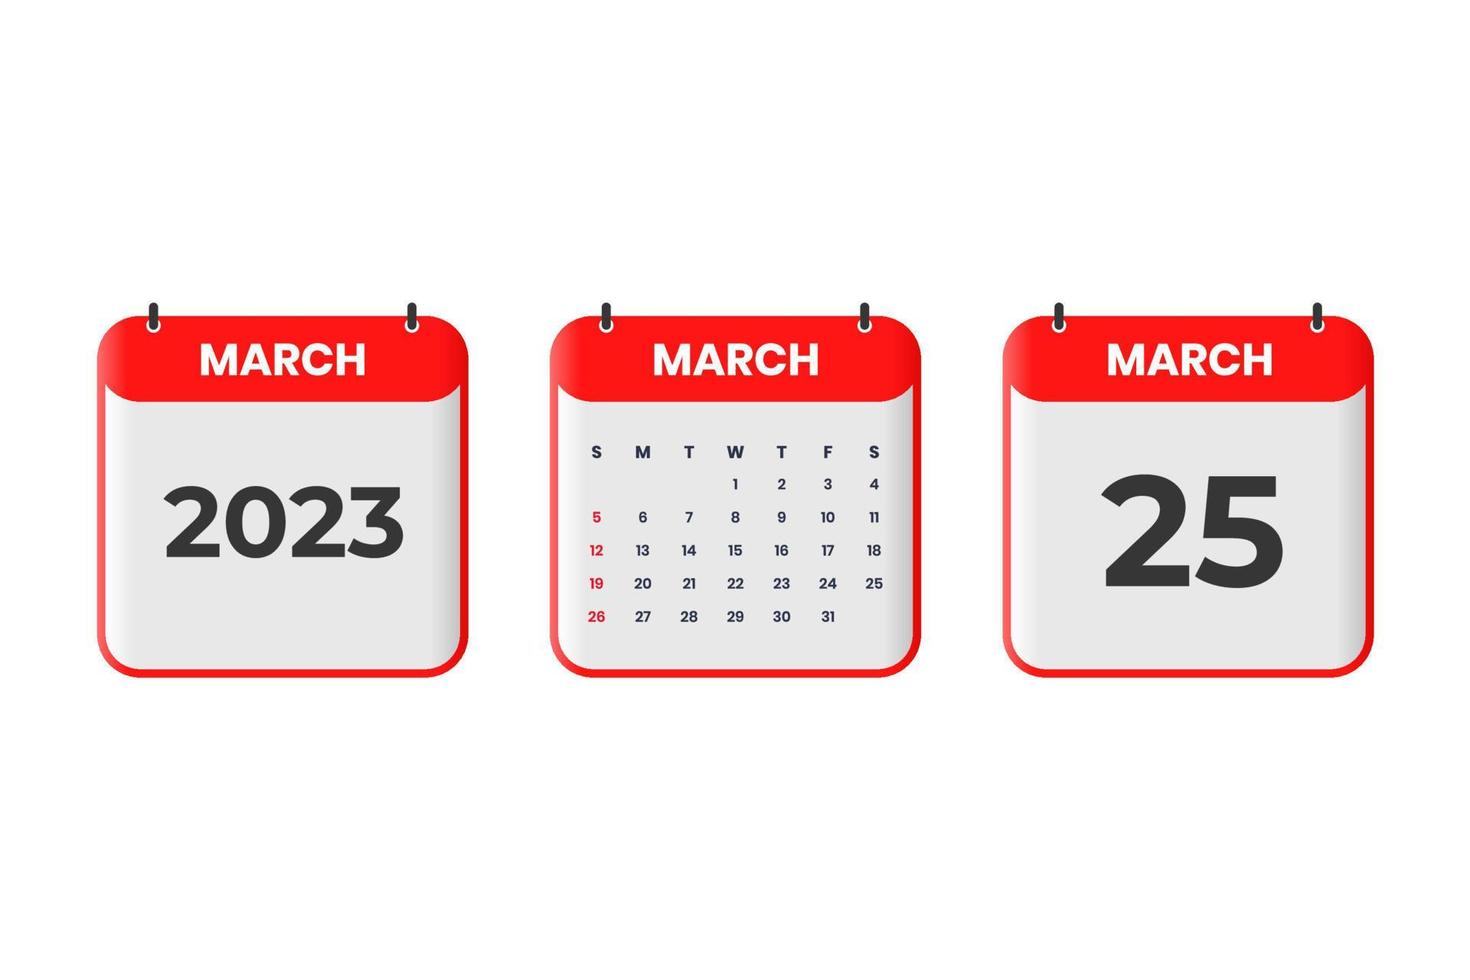 March 2023 calendar design. 25th March 2023 calendar icon for schedule, appointment, important date concept vector